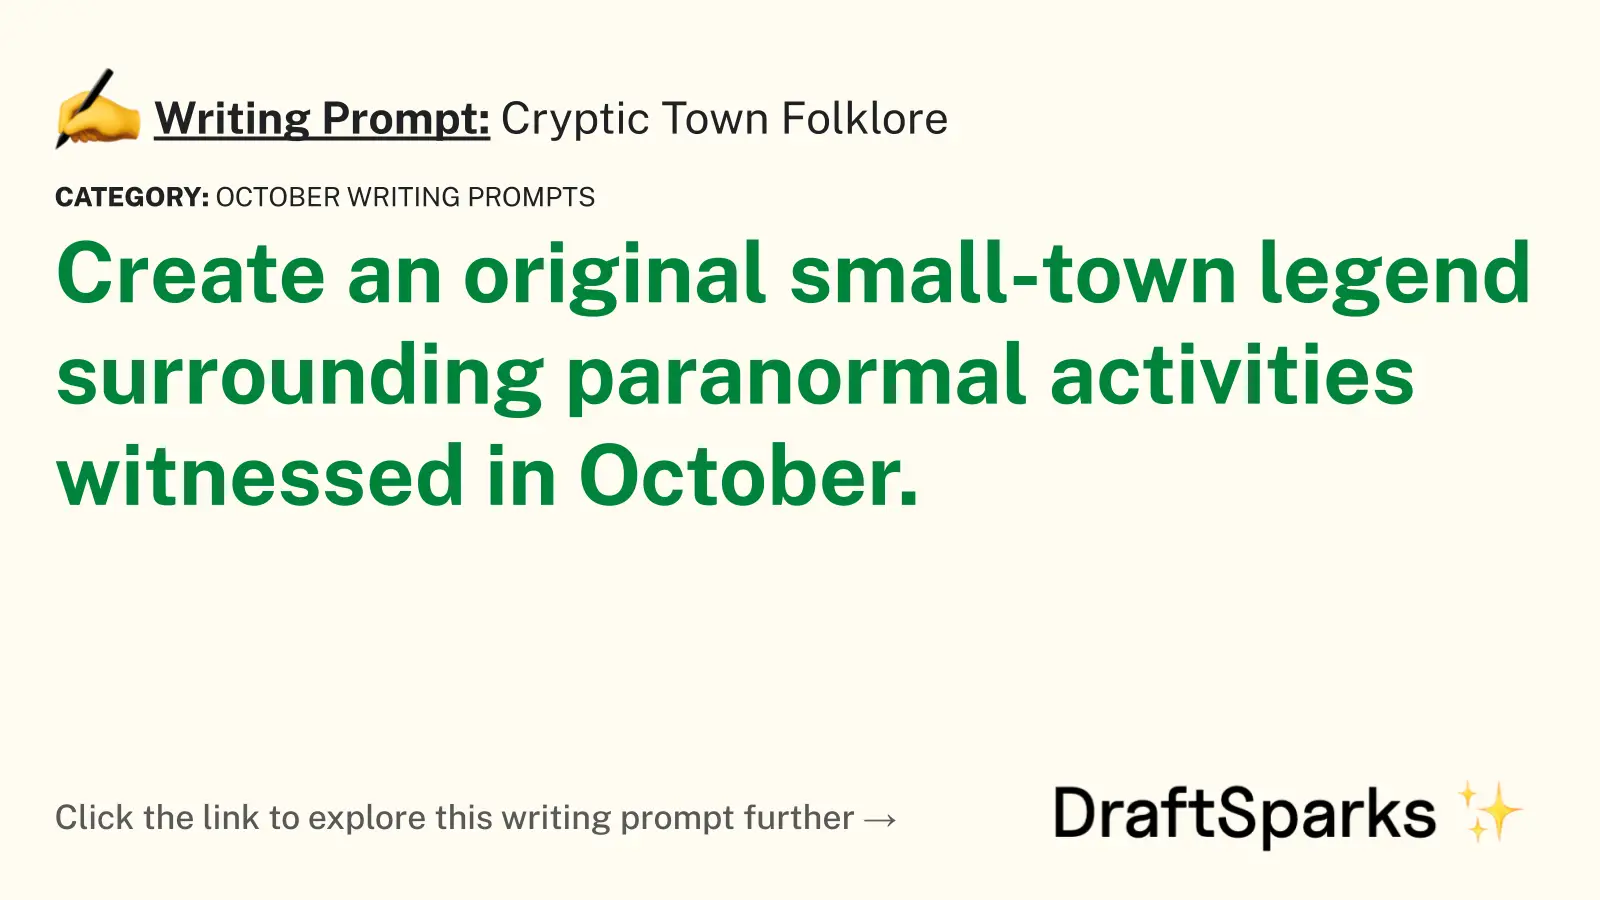 Cryptic Town Folklore